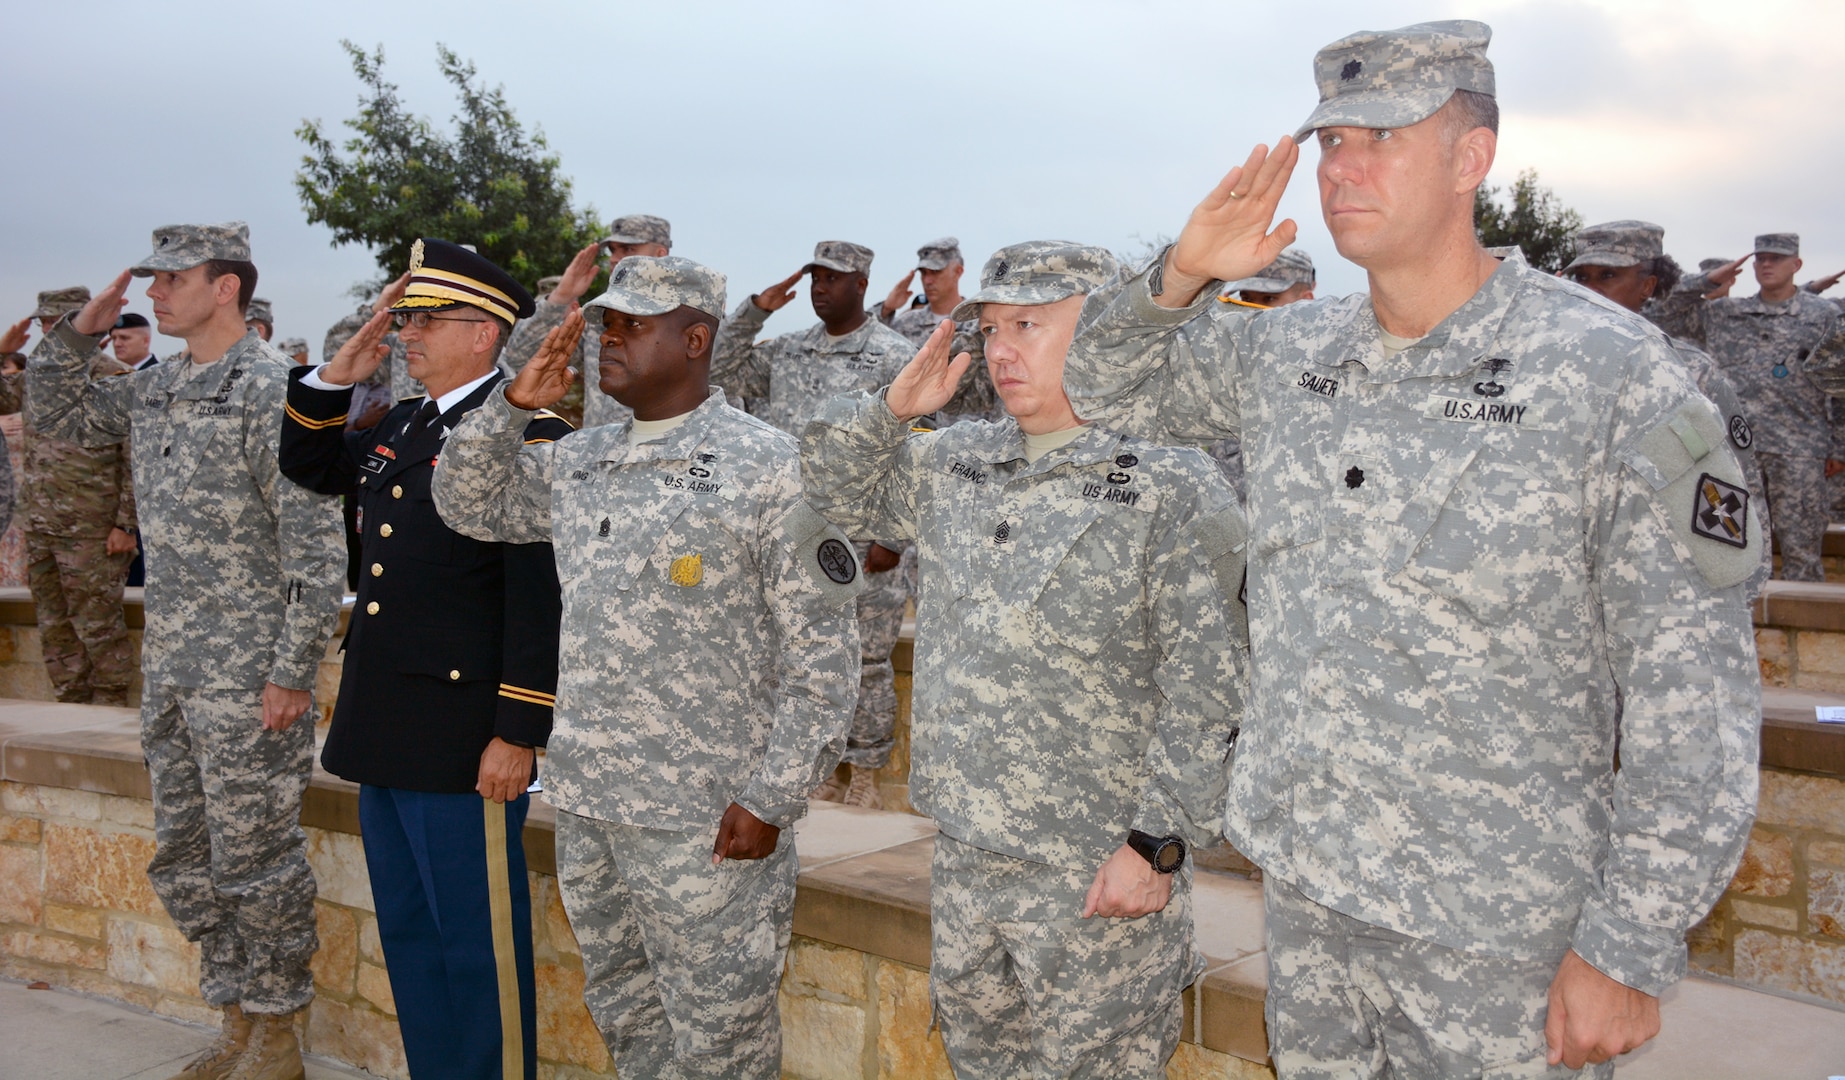 Members and friends of the U.S. Army Medical Service Corps salute during the playing of the National Anthem at the  US Army Medical Service Corps 9/11 Remembrance Ceremony at the Fort Sam Houston National Cemetery, held in honor of the Medical Service Corps officers who paid the ultimate sacrifice as a result of the terrorist attack on Sept. 11, 2001 and in support of combat operations.  